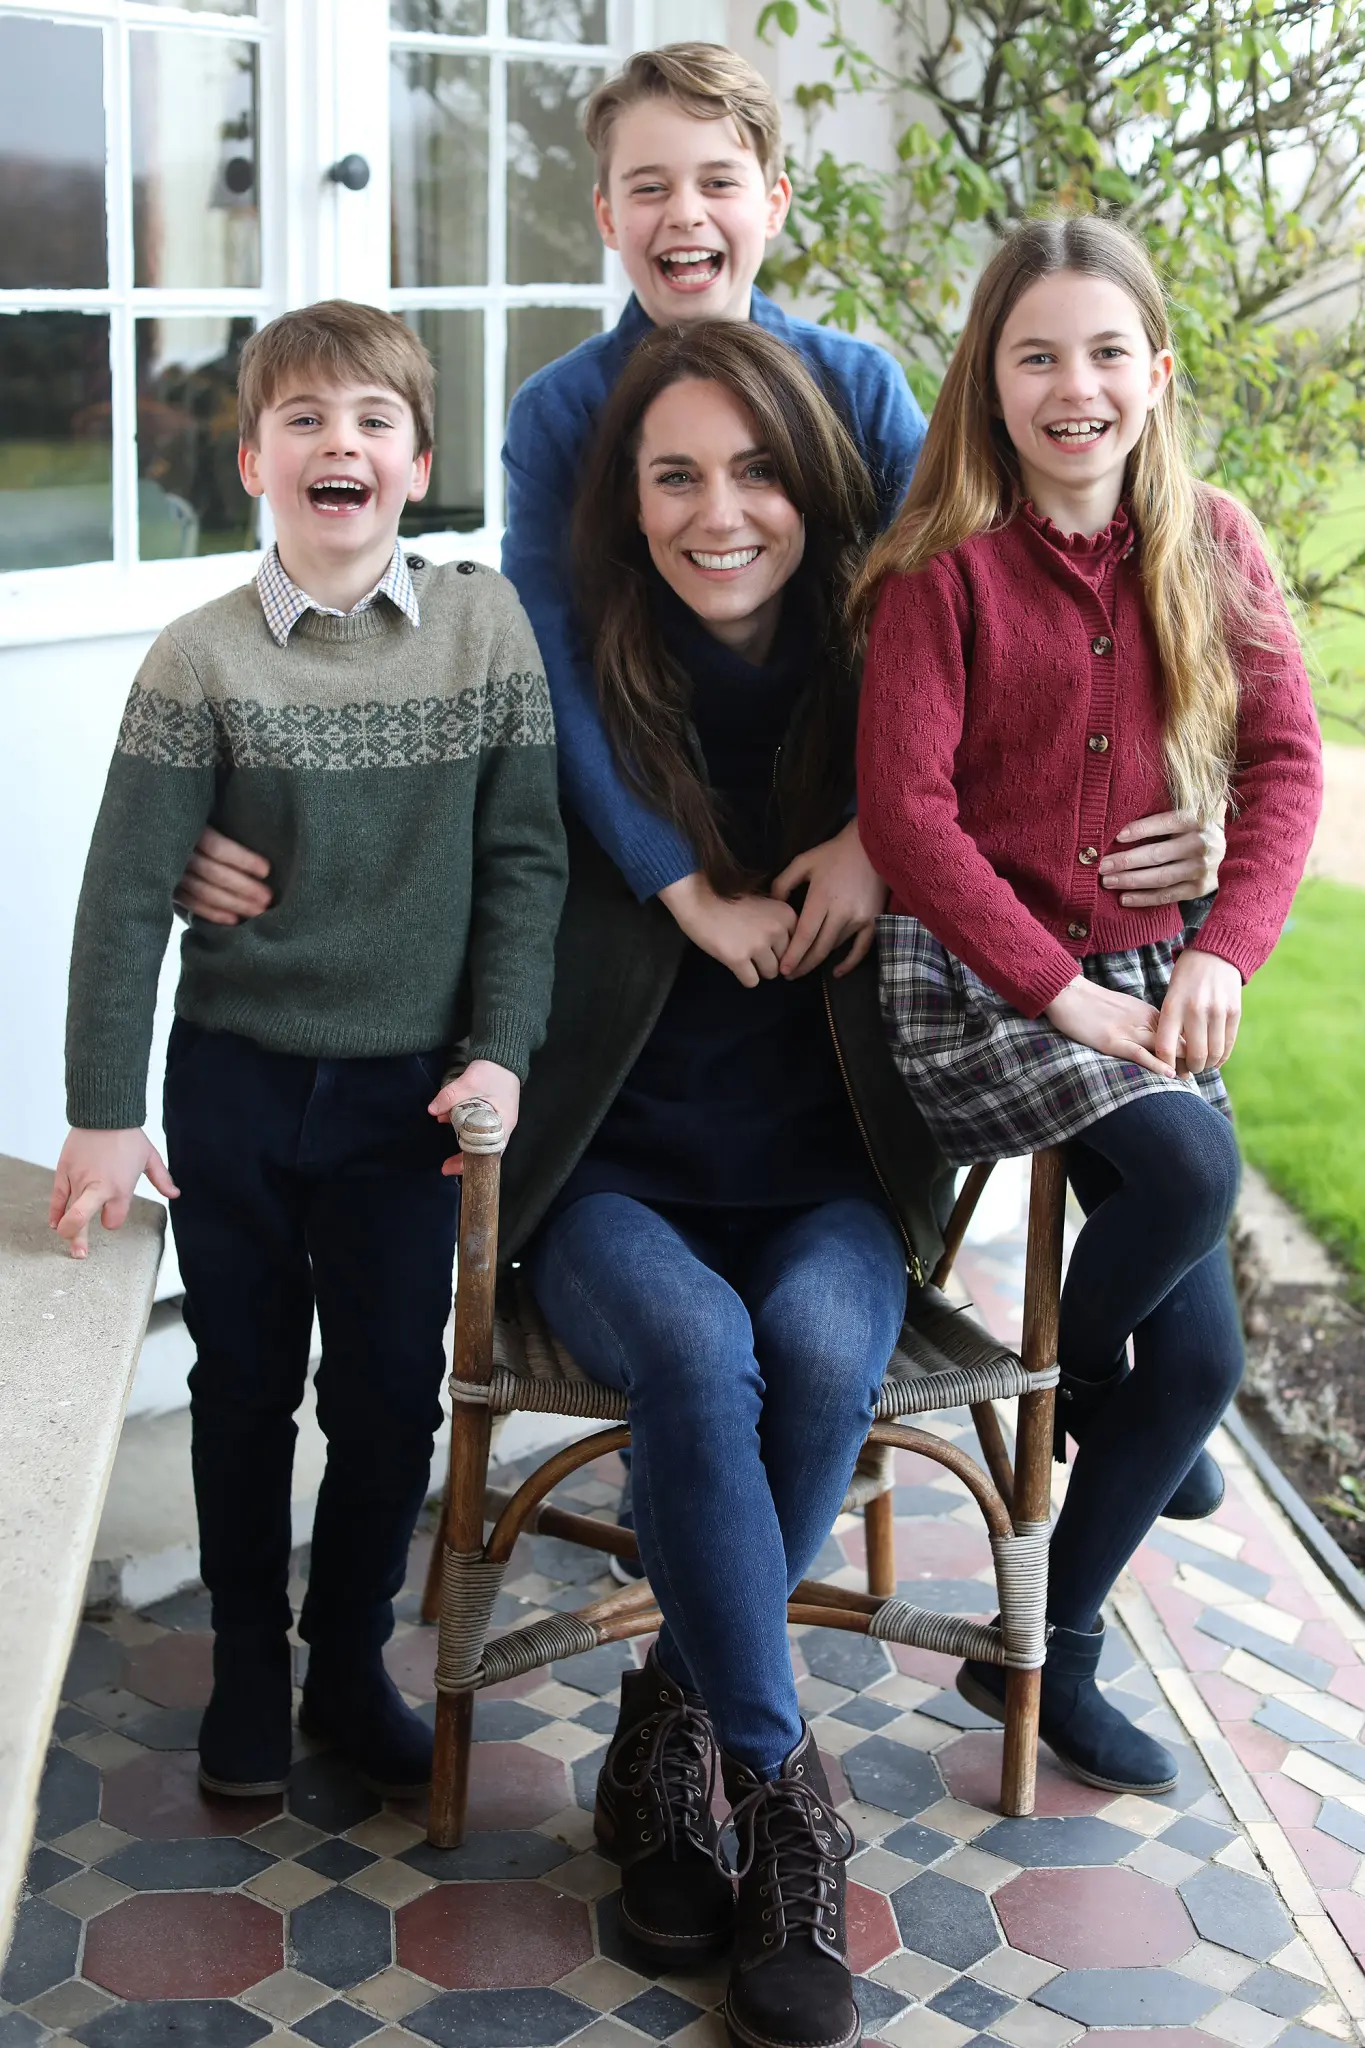 Major photo agencies issued a “kill notice” regarding a new photograph issued by Kensington Palace of Kate Middleton and her three children. Prince of Wales/Kensington Palac / MEGA